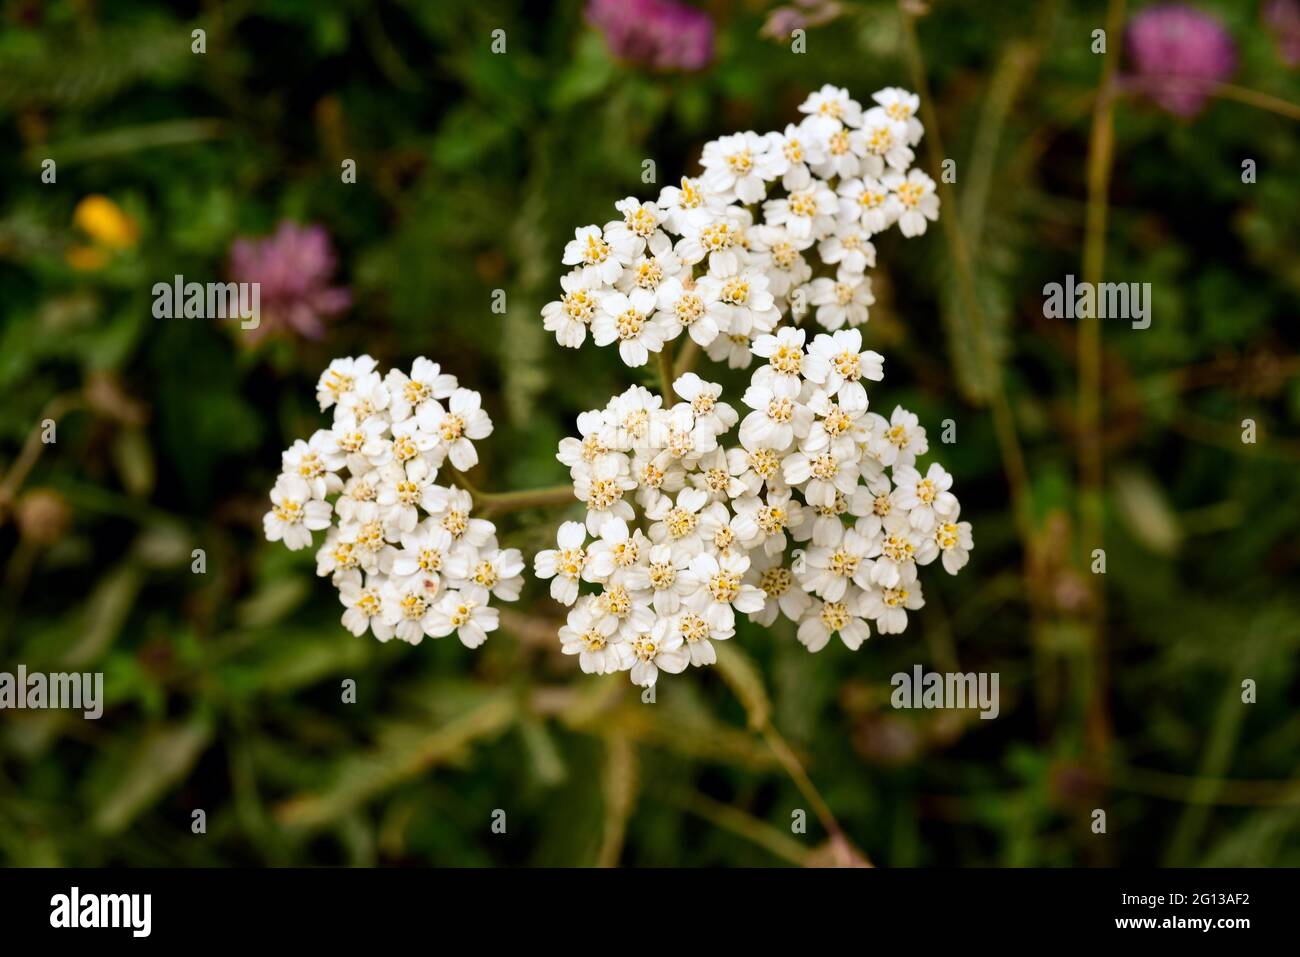 Yarrow (Achillea millefolium) is a medicinal perennial plant native to Europe, Asia and North America. This photo was taken in Andorra Pyrenees. Stock Photo